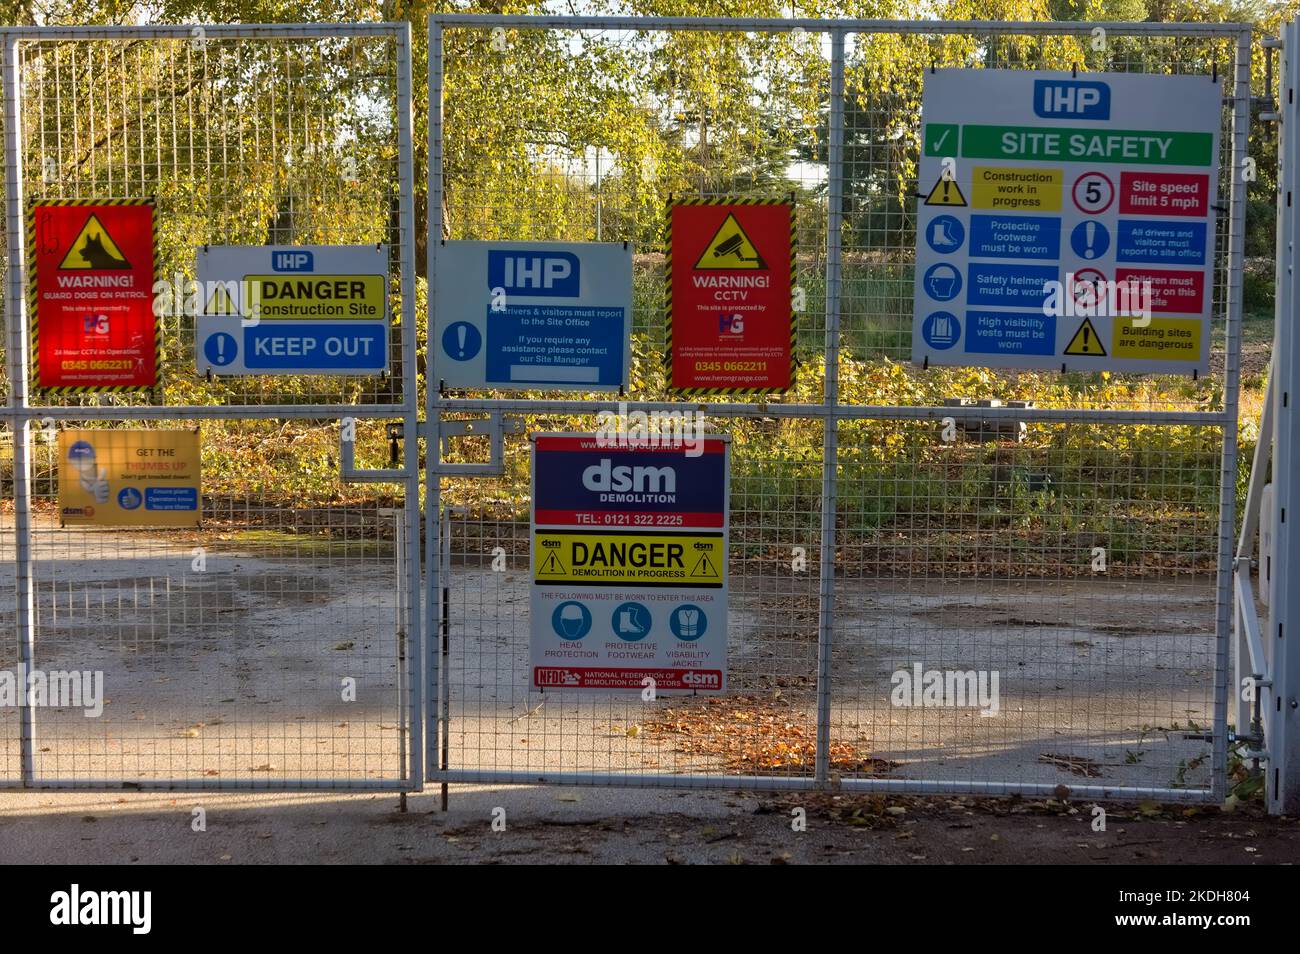 Construction site gate with various warning signs incl. 'DSM demolition' Stock Photo